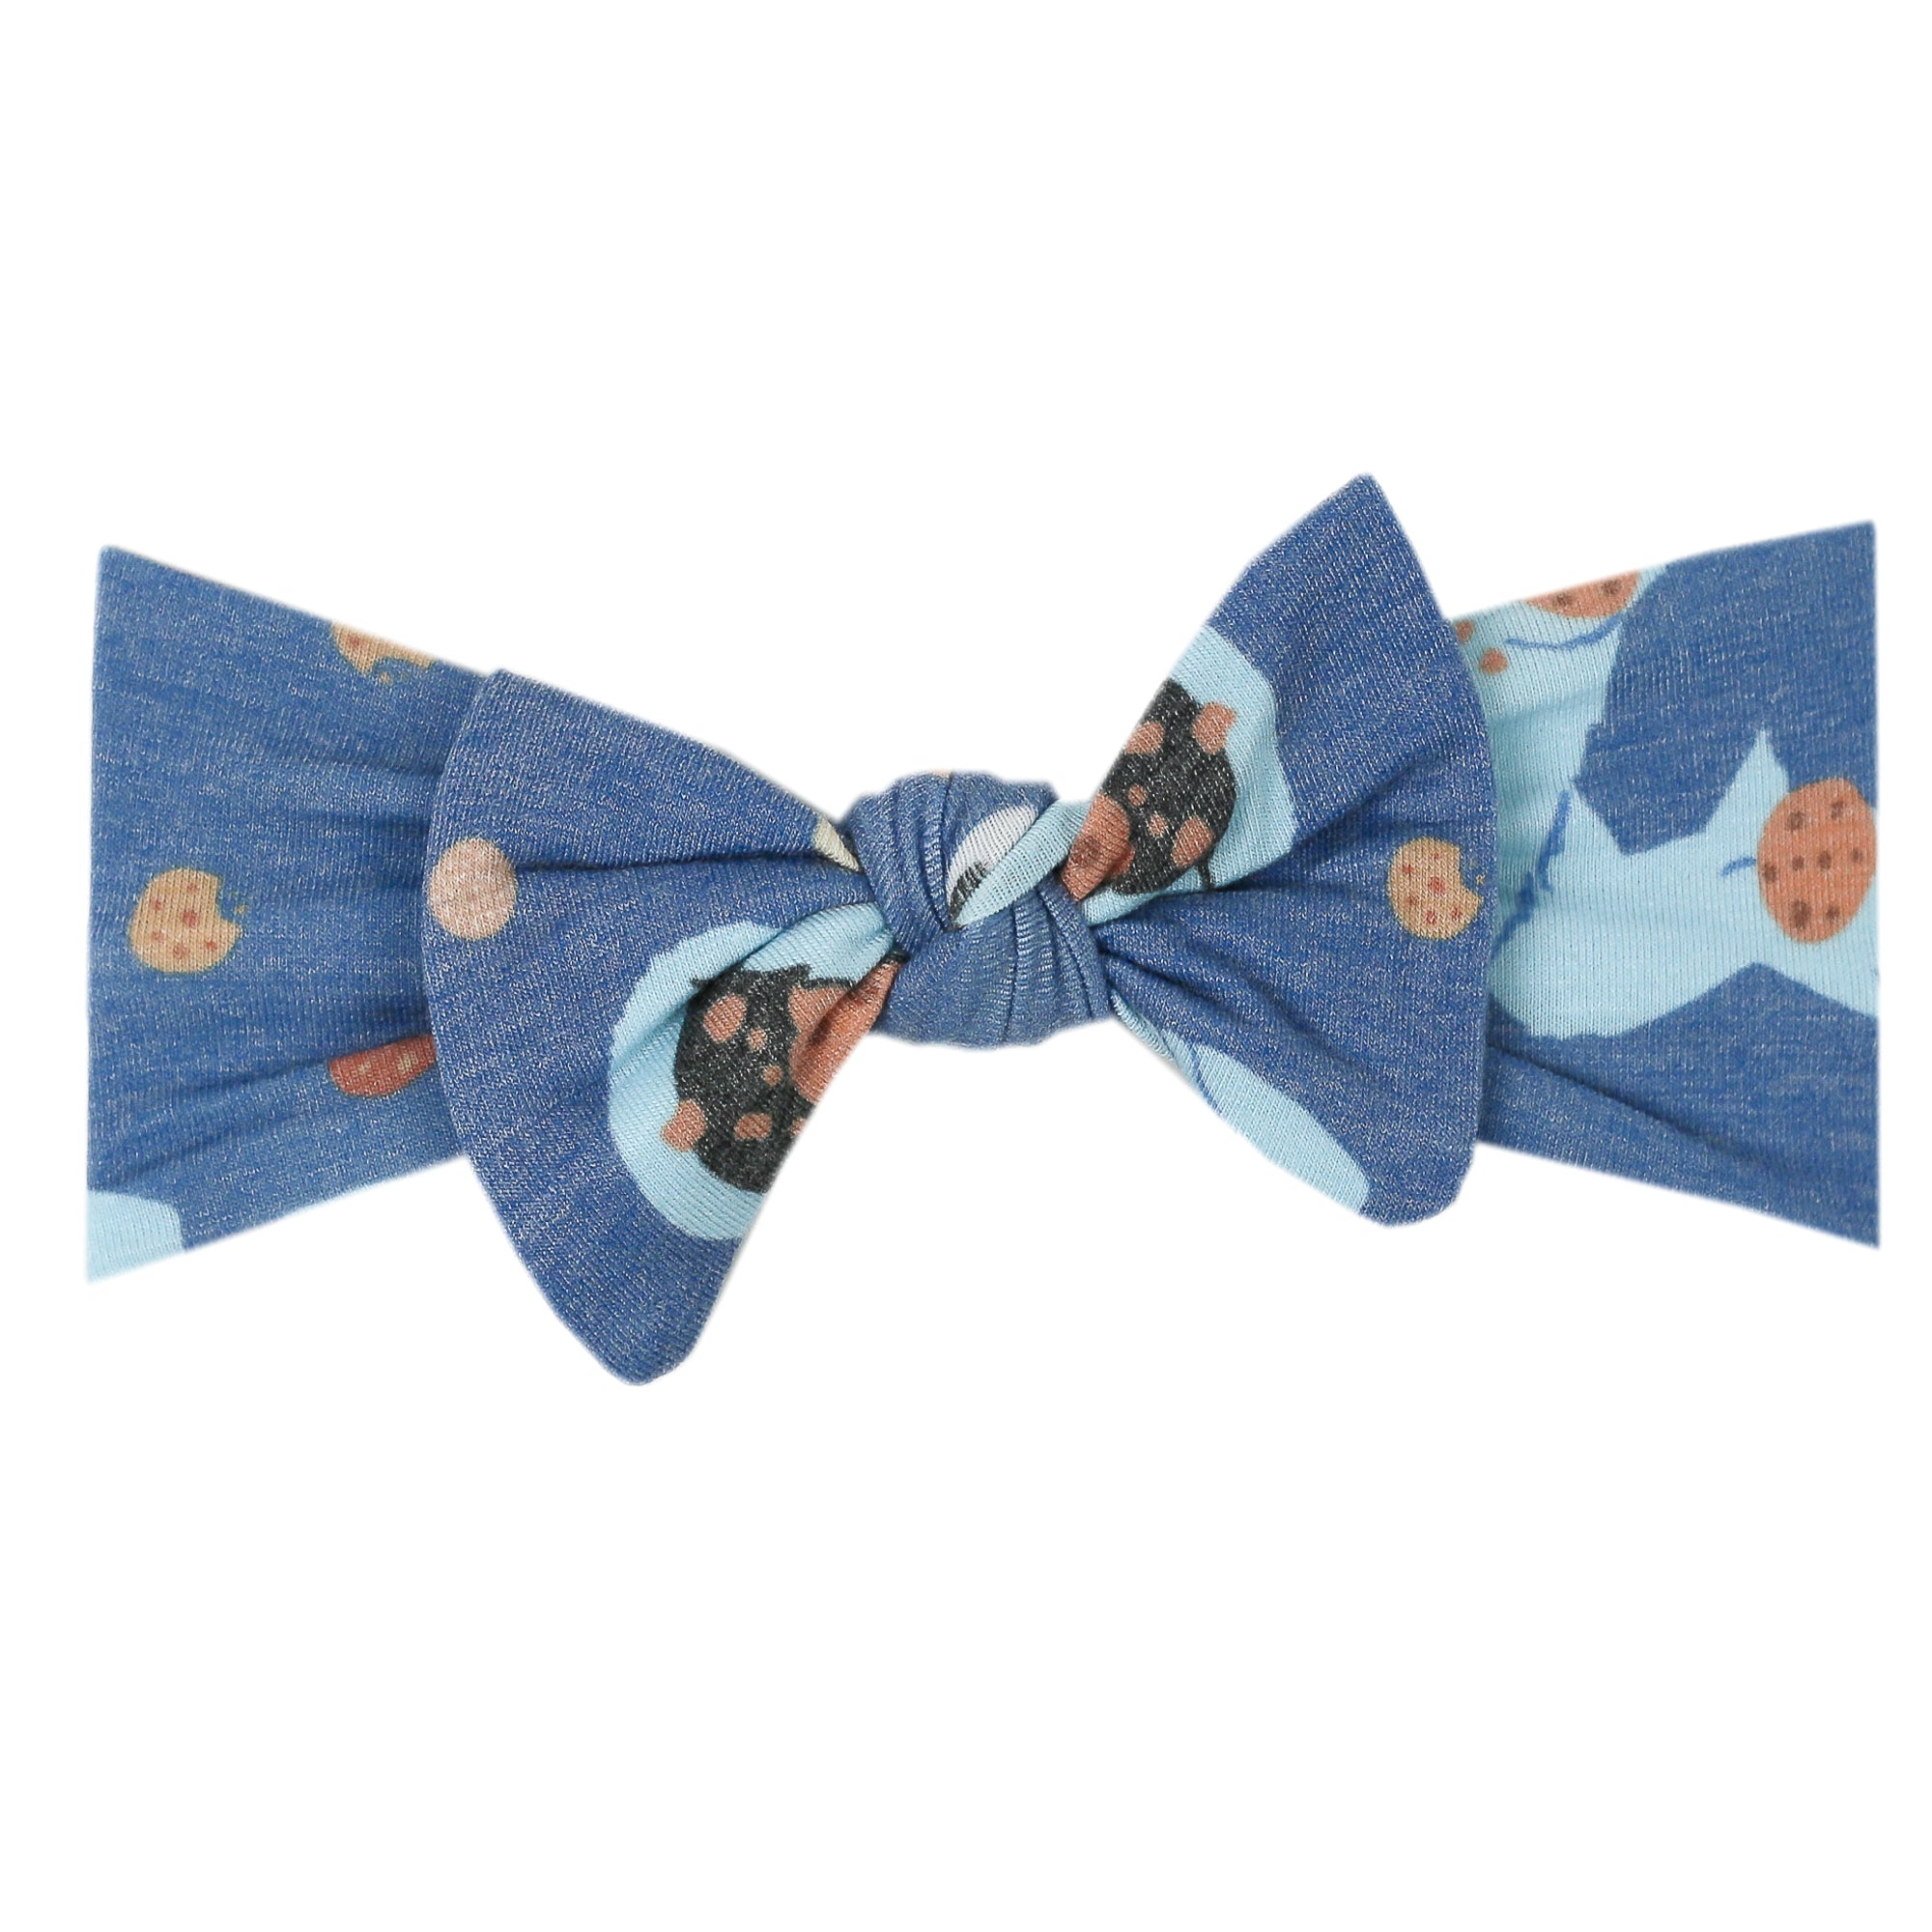 Knit Headband Bow - Cookie Monster